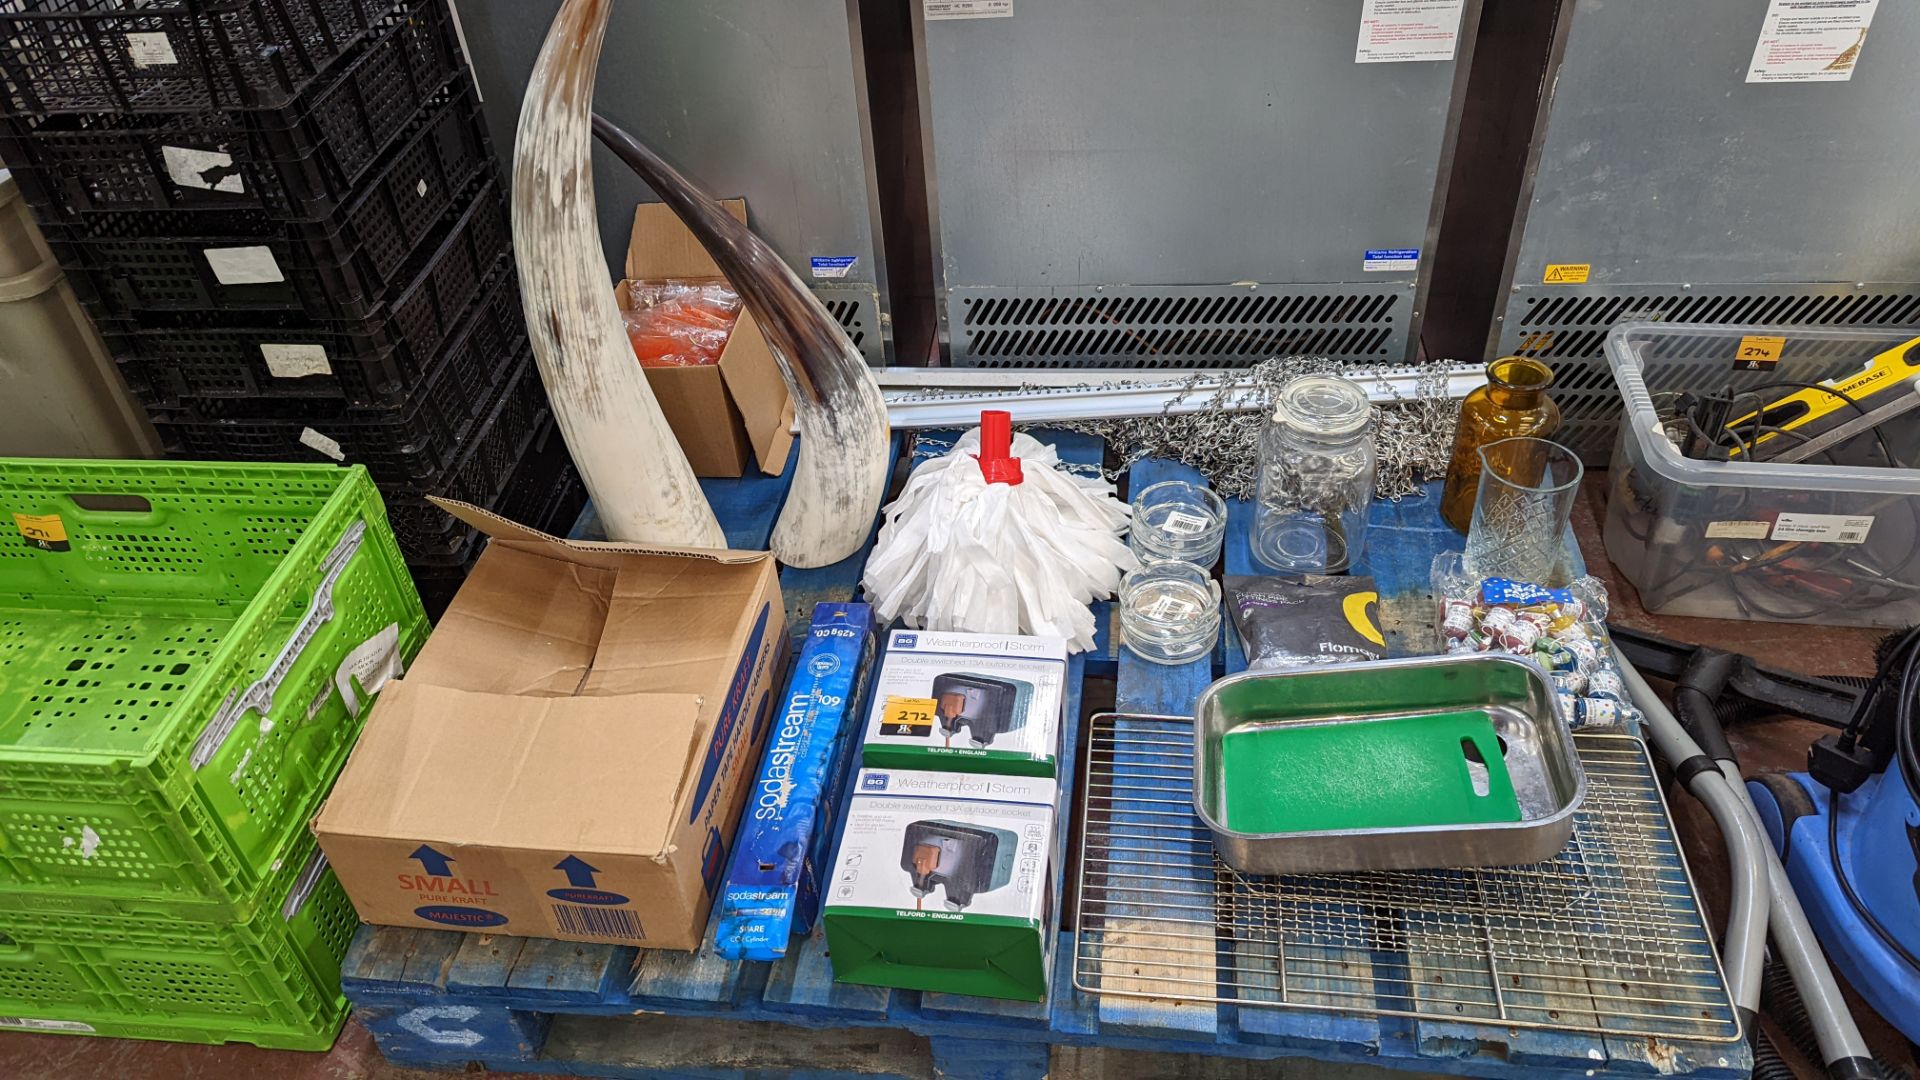 The contents of a pallet of assorted items including paper bags, weatherproof sockets, ornamental it